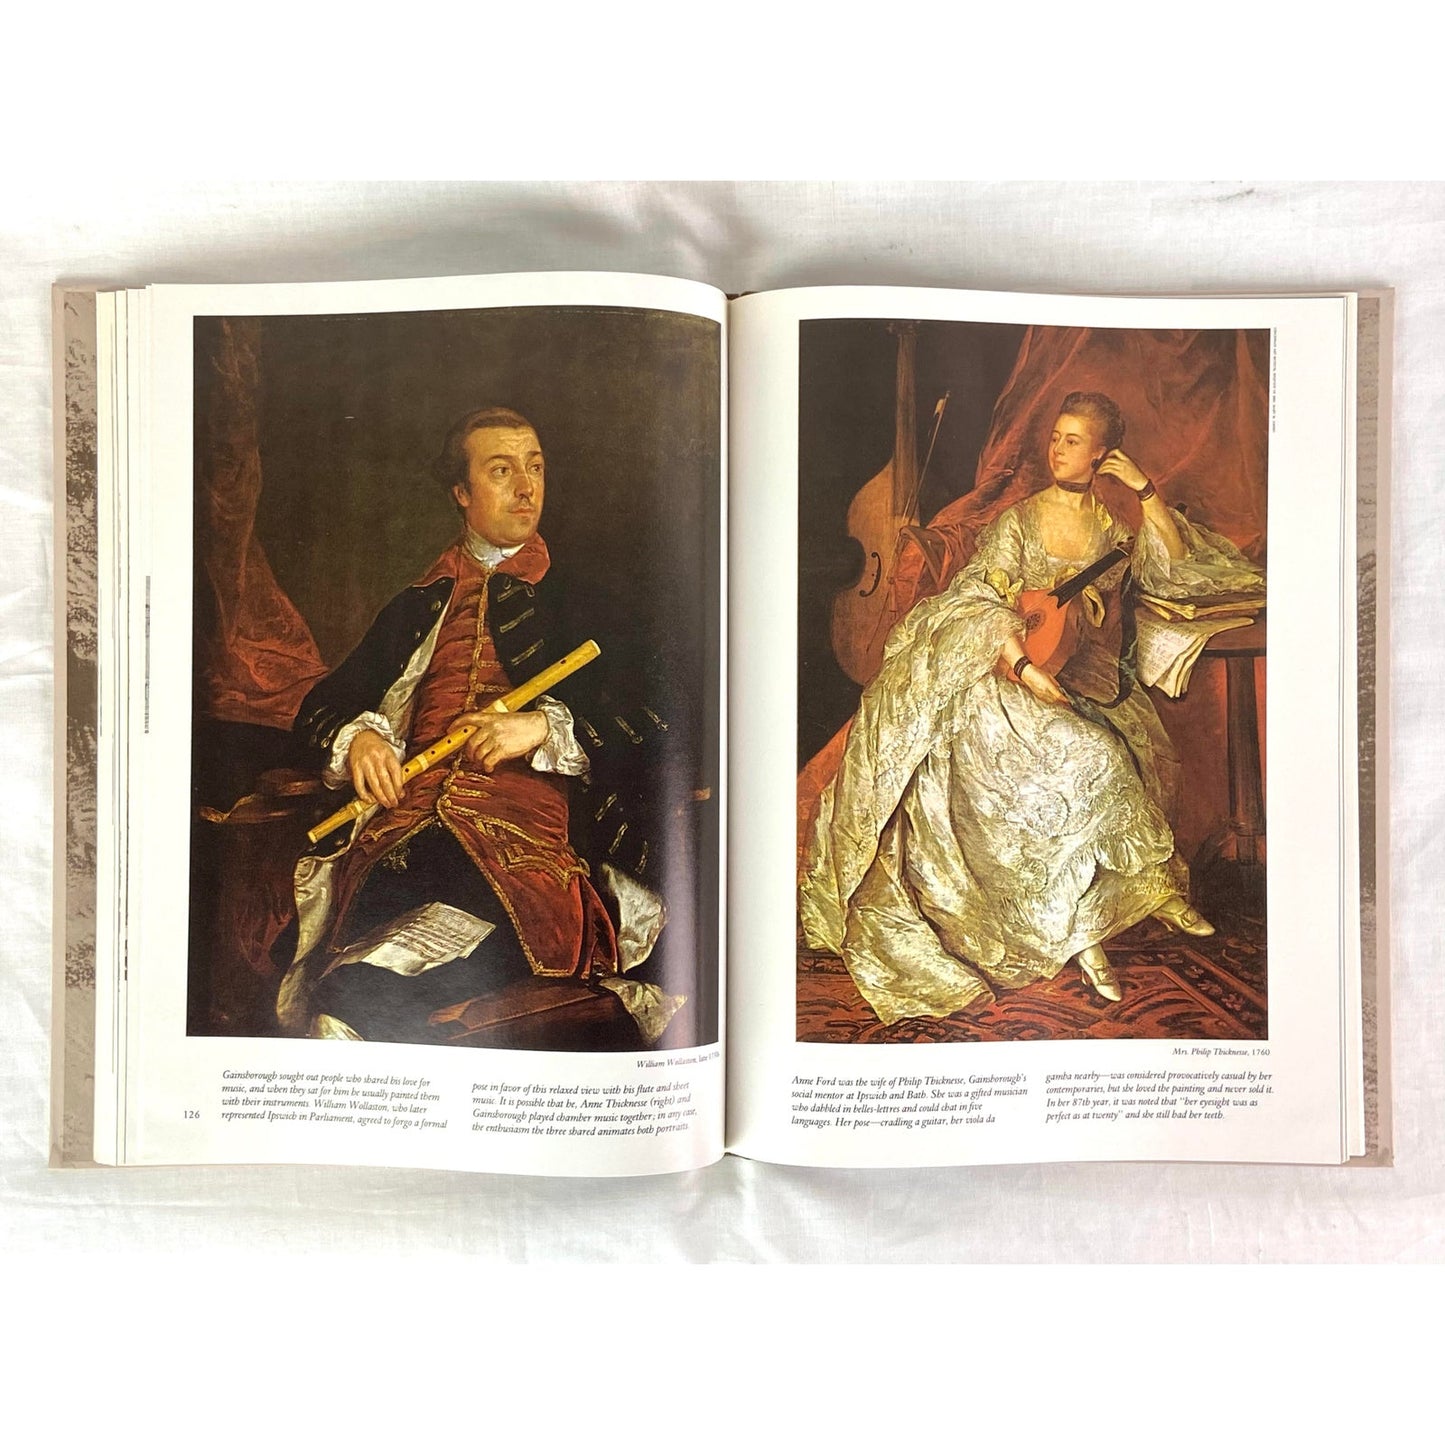 [ONLY 1 LEFT] Vintage “The World of Gainsborough” Art Book